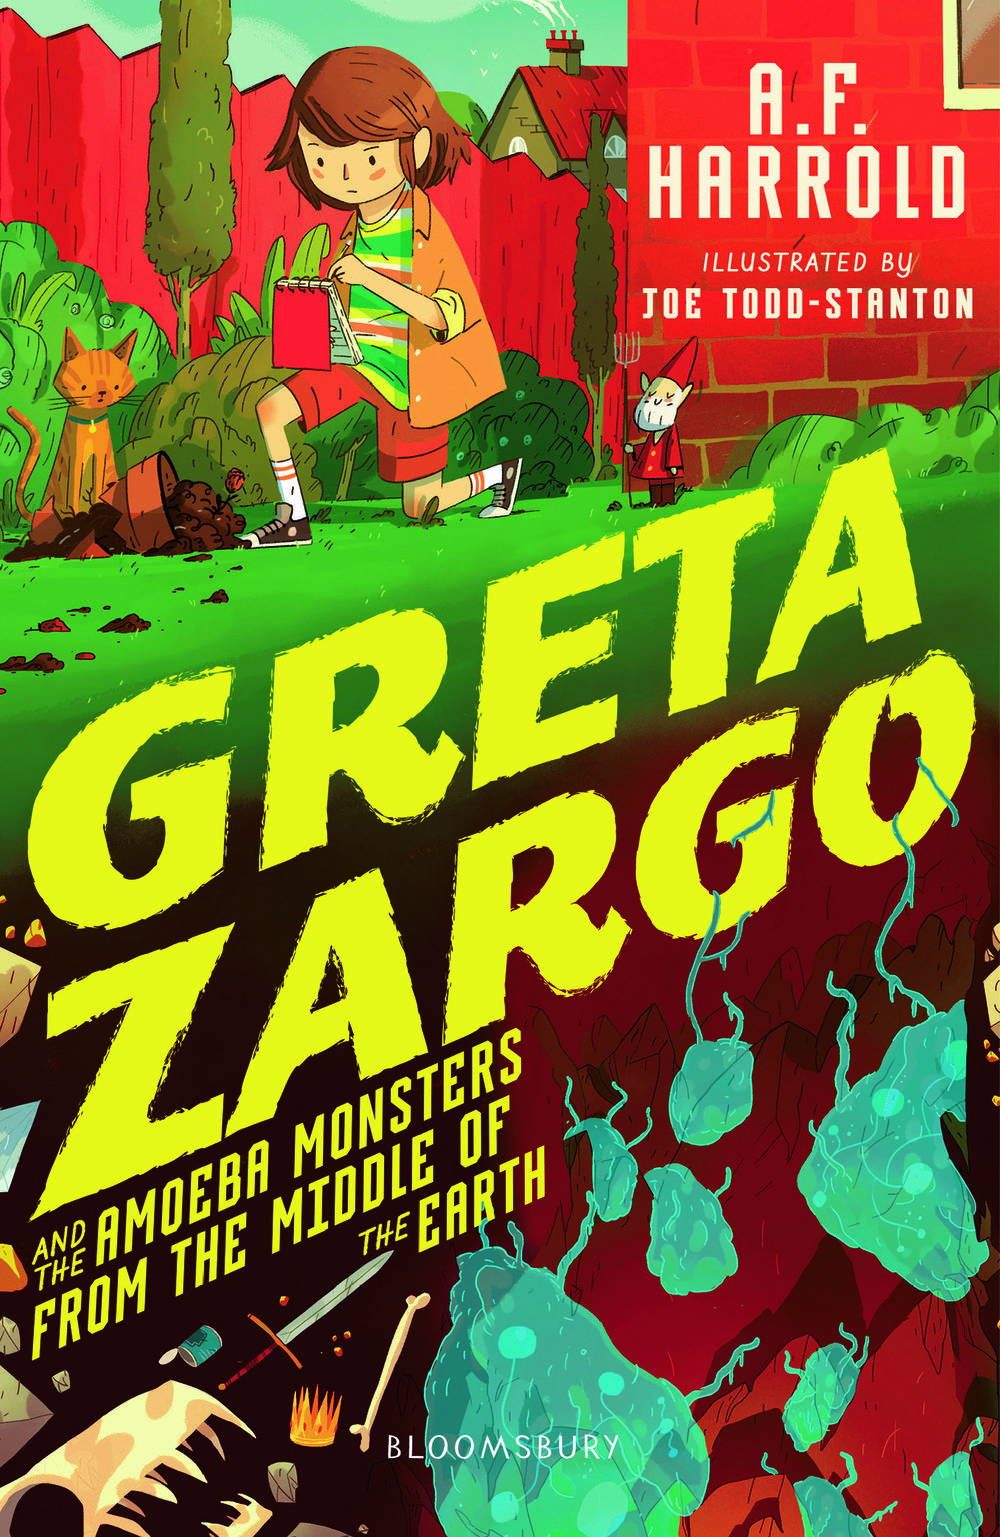 Greta Zargo and the Amoeba Monsters from the Middle of the Earth | A.F. Harrold